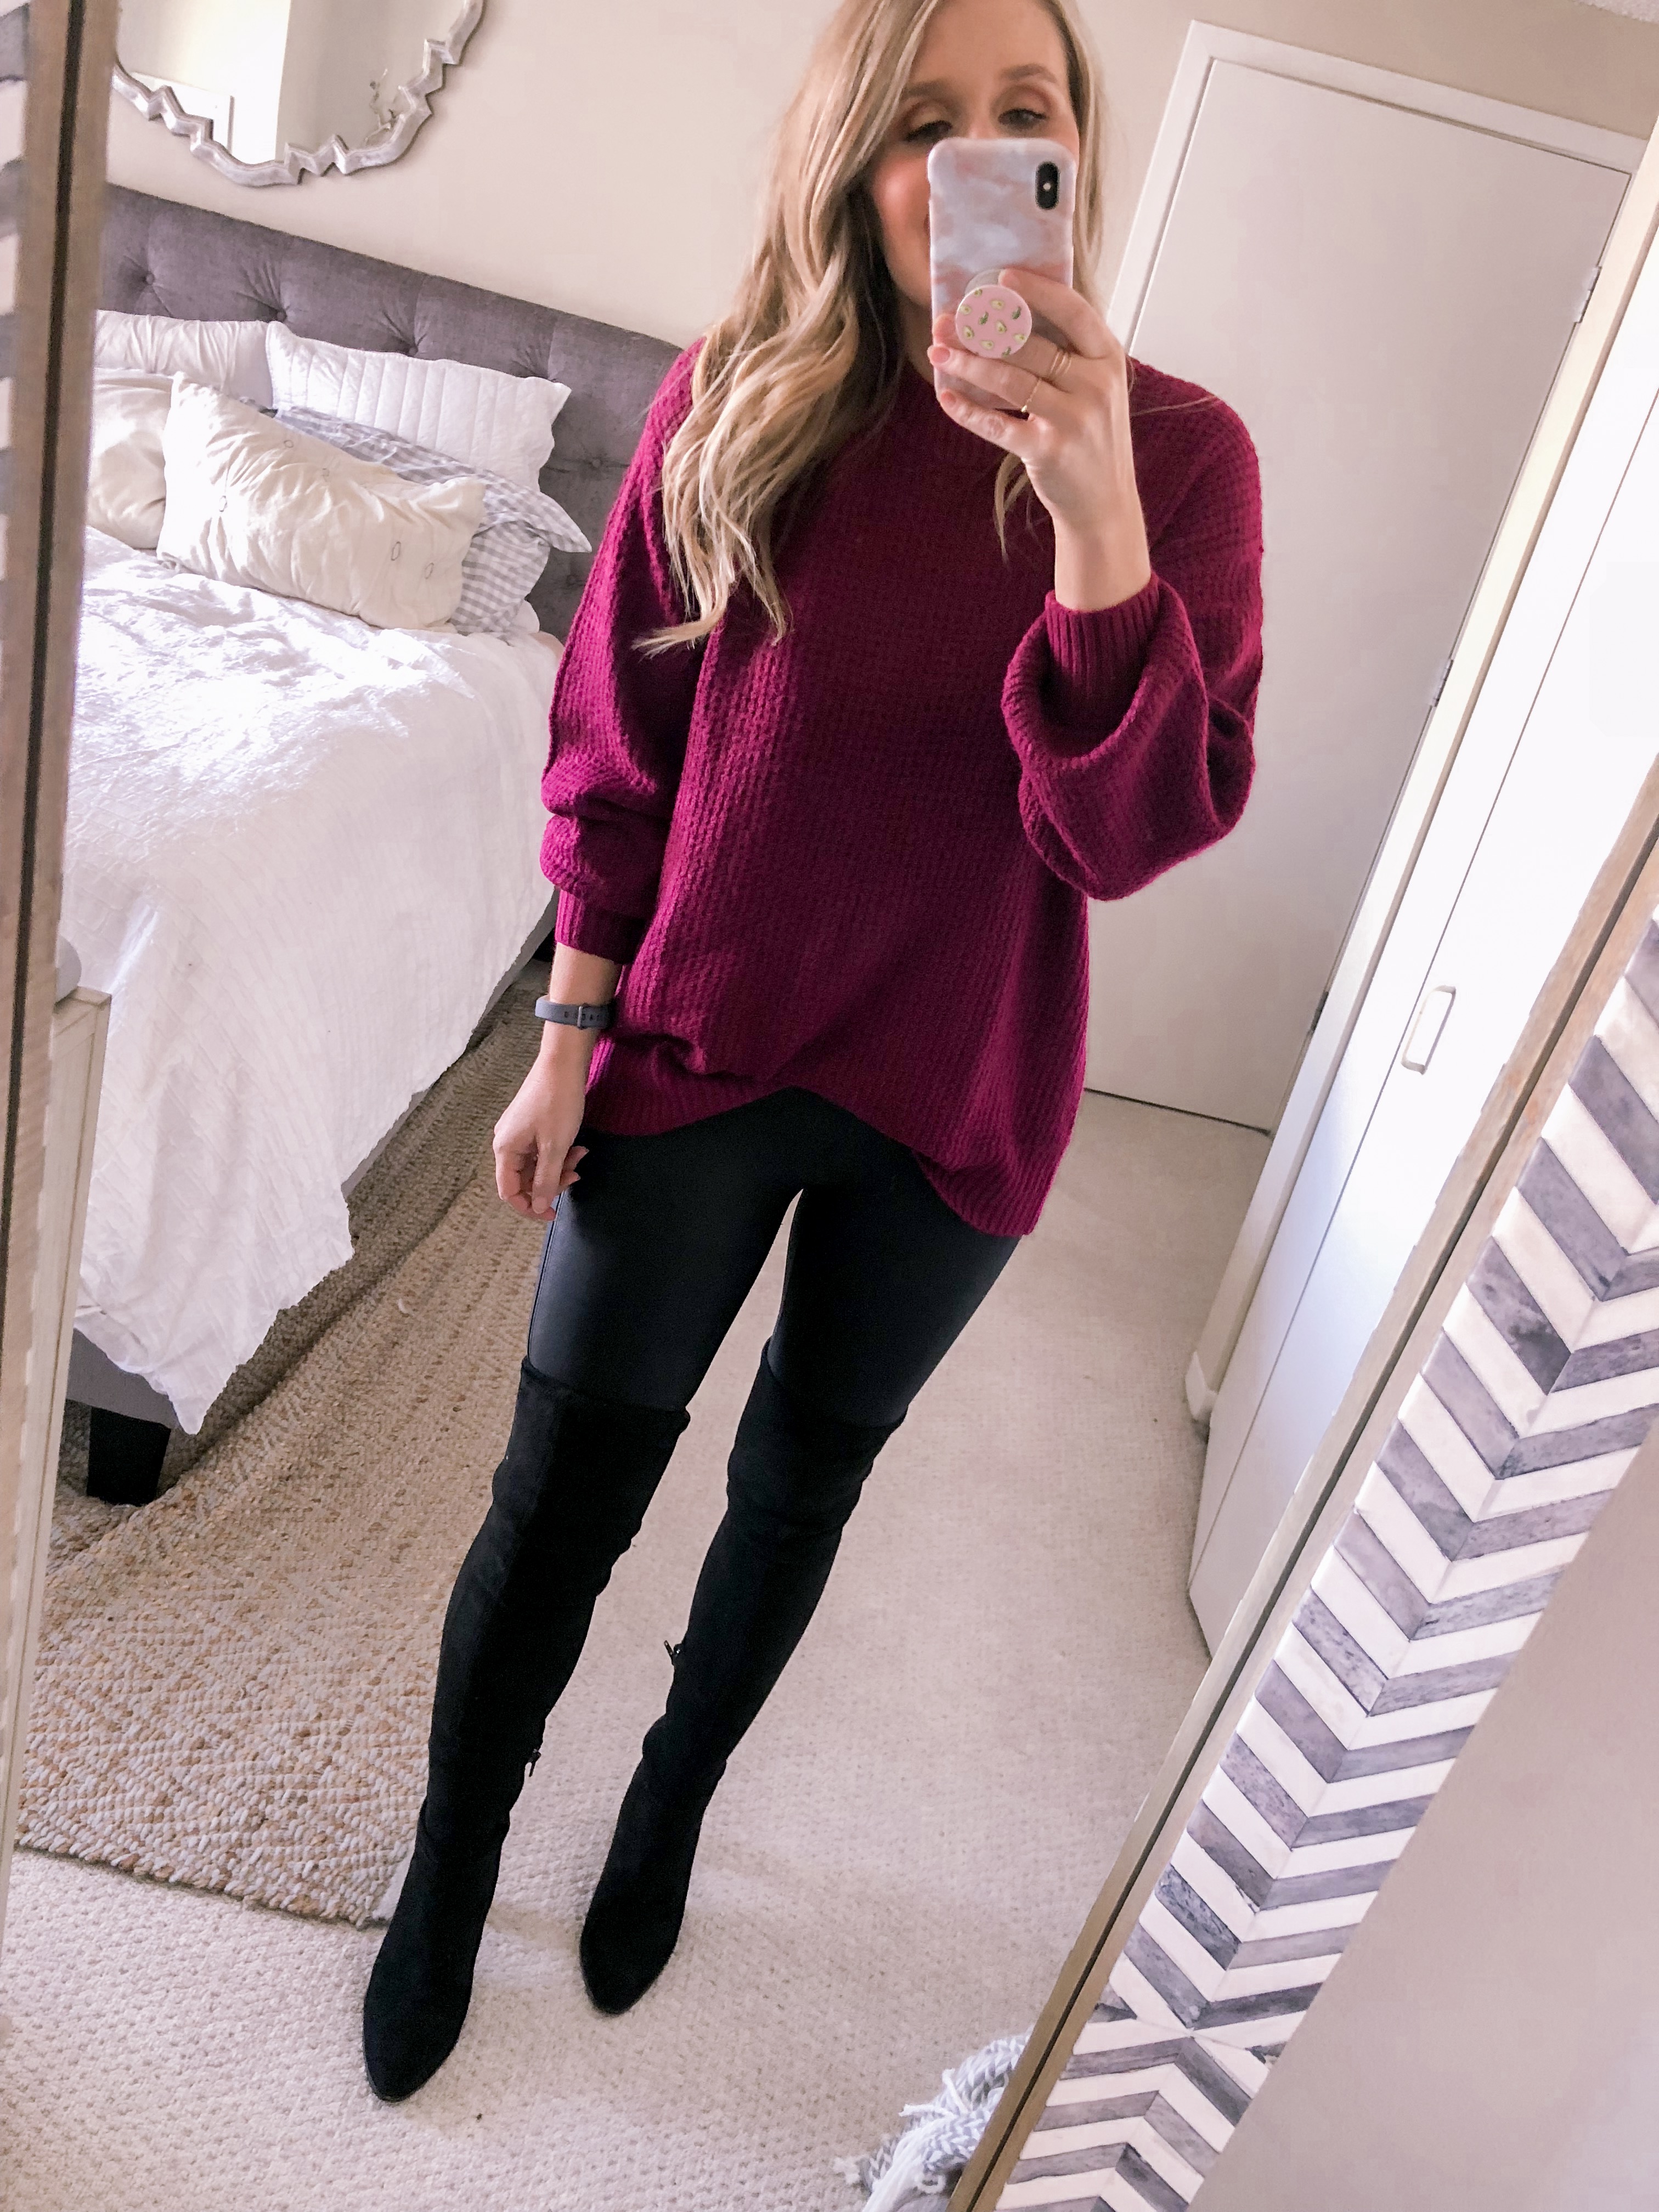 Chicago fashion blogger Visions of Vogue styles a burgundy crewneck sweater with black faux leather leggings by Spanx for the office for work outfit ideas.